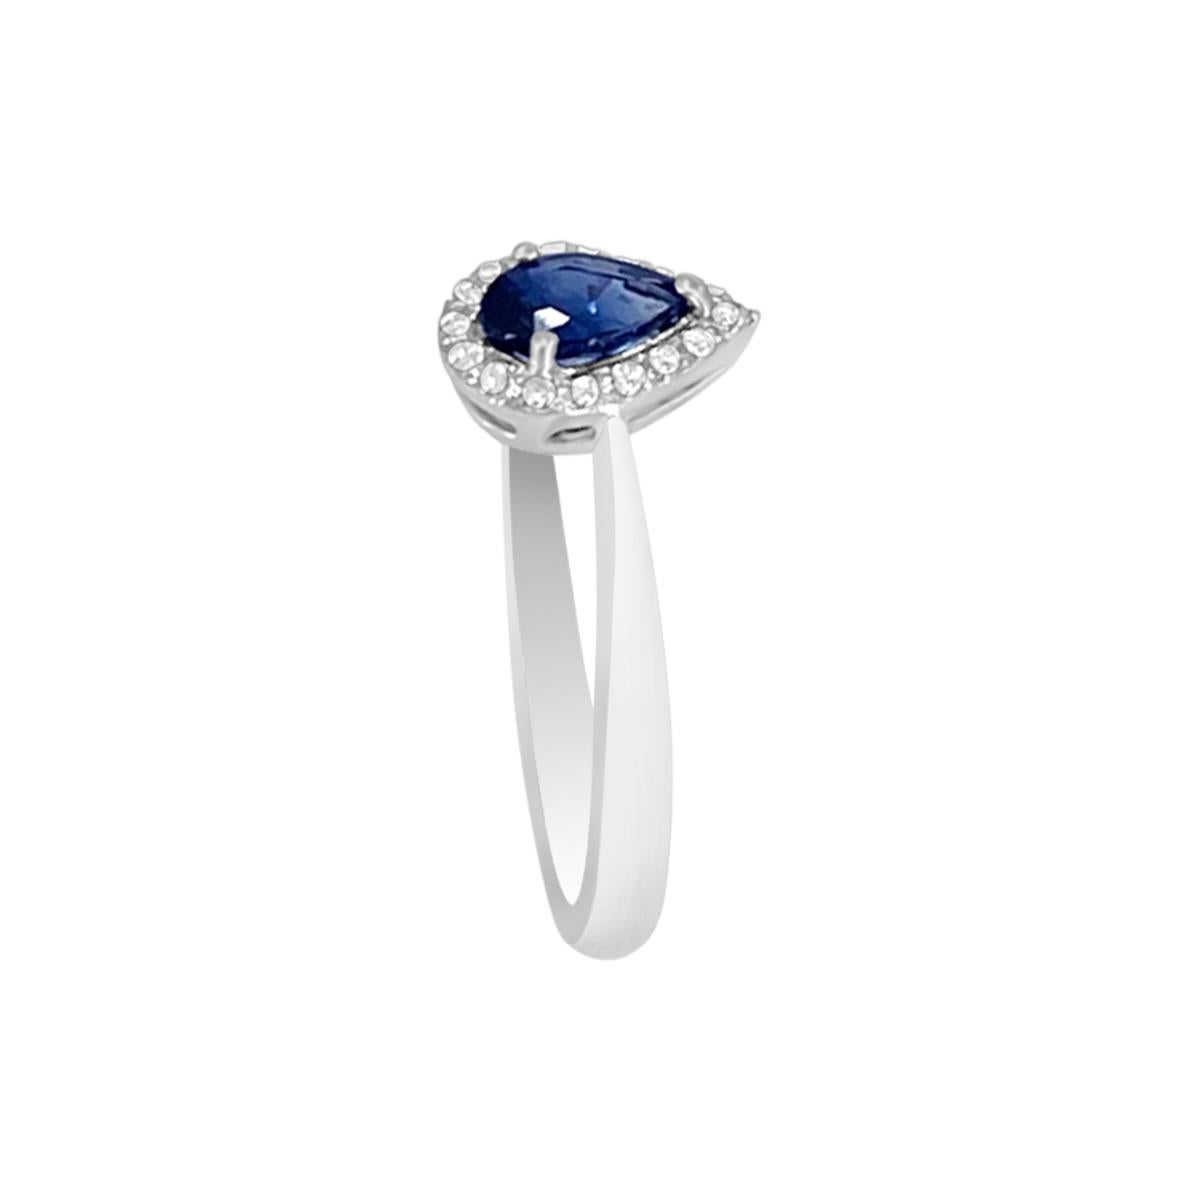 This Stunning Piece Of Jewelry Features A Pear Shaped Sapphire Gemstone With Diamonds Studded In 18K White Gold. The Sapphire Ring Is Designed To Bring Harmony To Your Everlasting Relationship. Make Your Partner Feel More Special On A Special Day